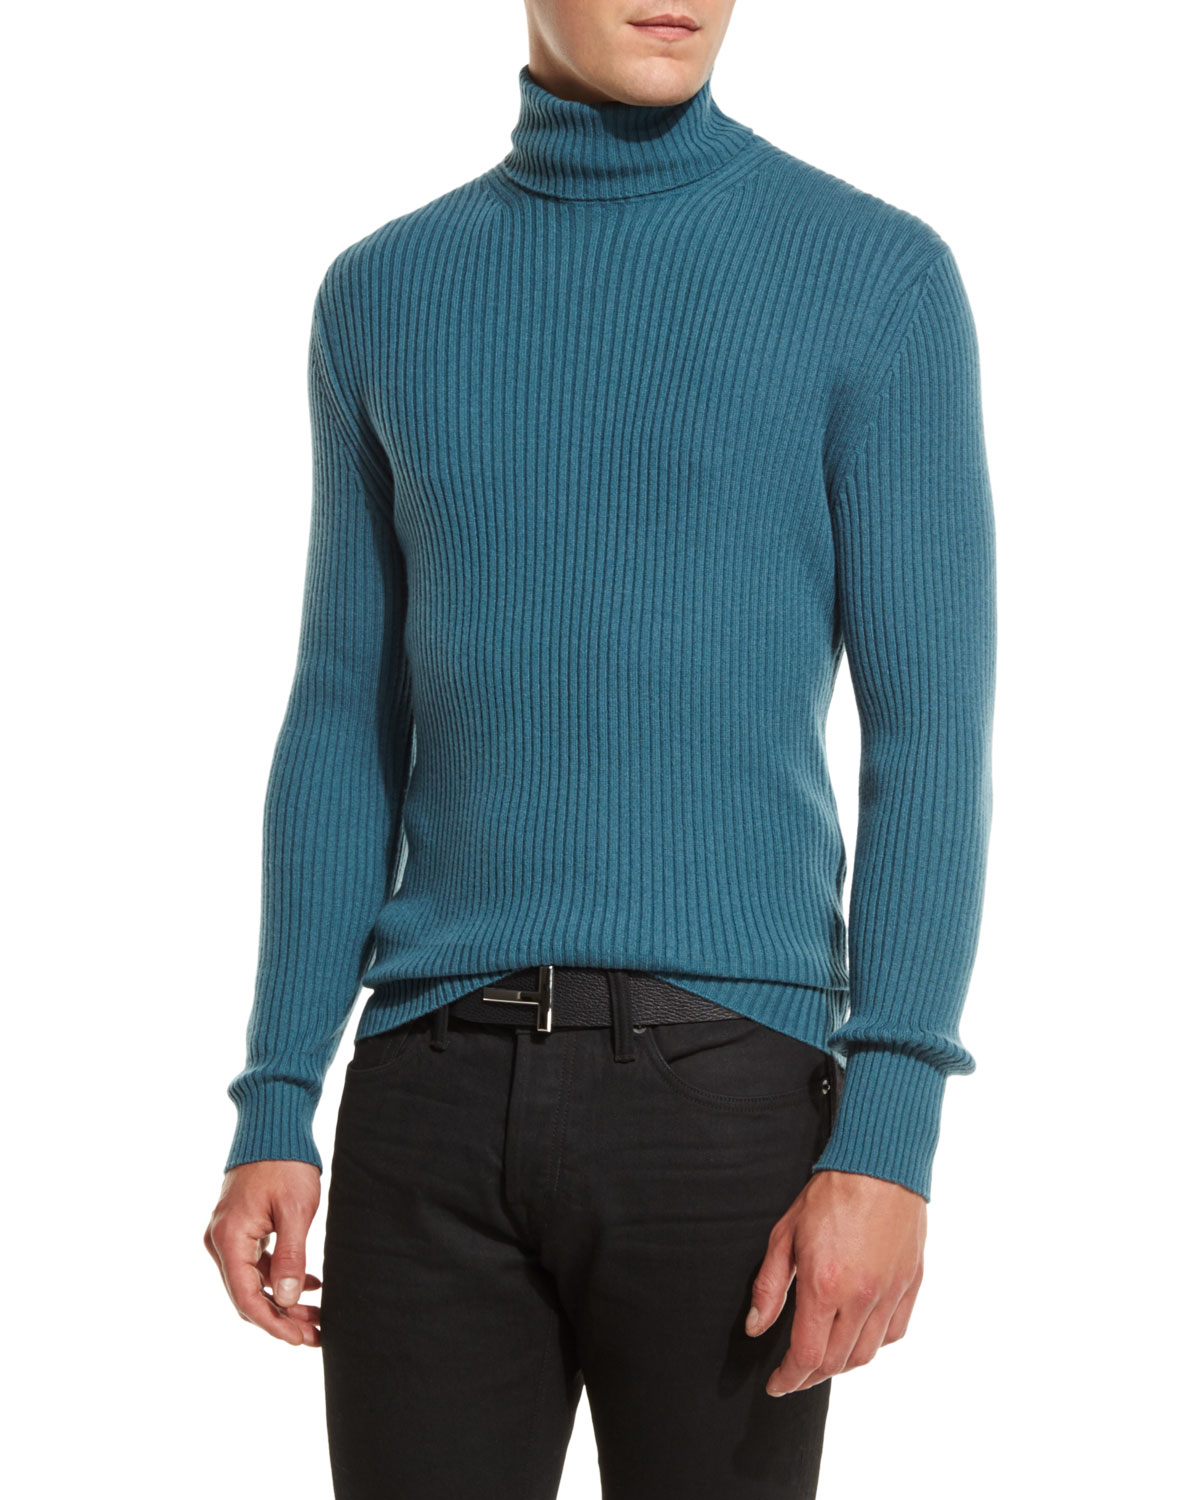 Tom Ford Cashmere Ribbed Turtleneck Sweater in Blue for Men - Lyst